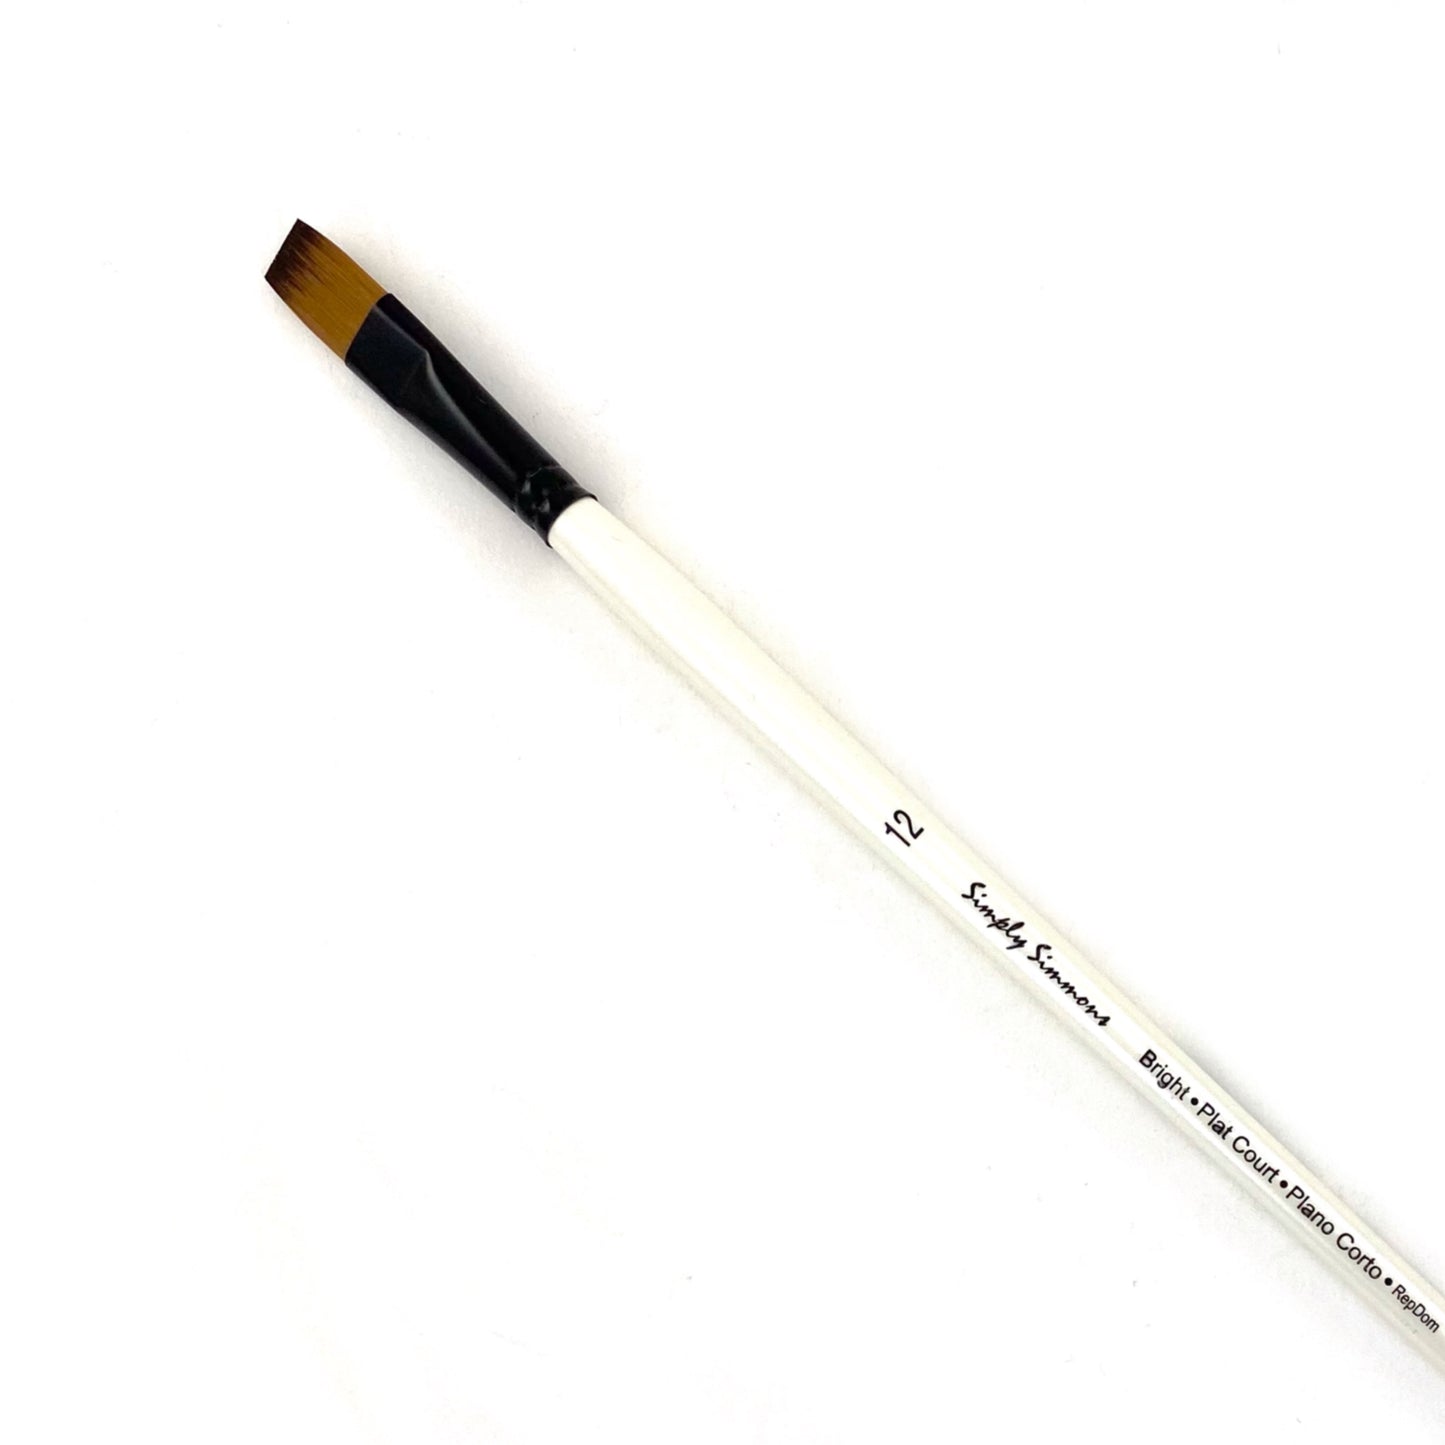 Simply Simmons All-Media Brush - Long Handle - Bright (Synthetic Bristle) / #12 by Robert Simmons - K. A. Artist Shop